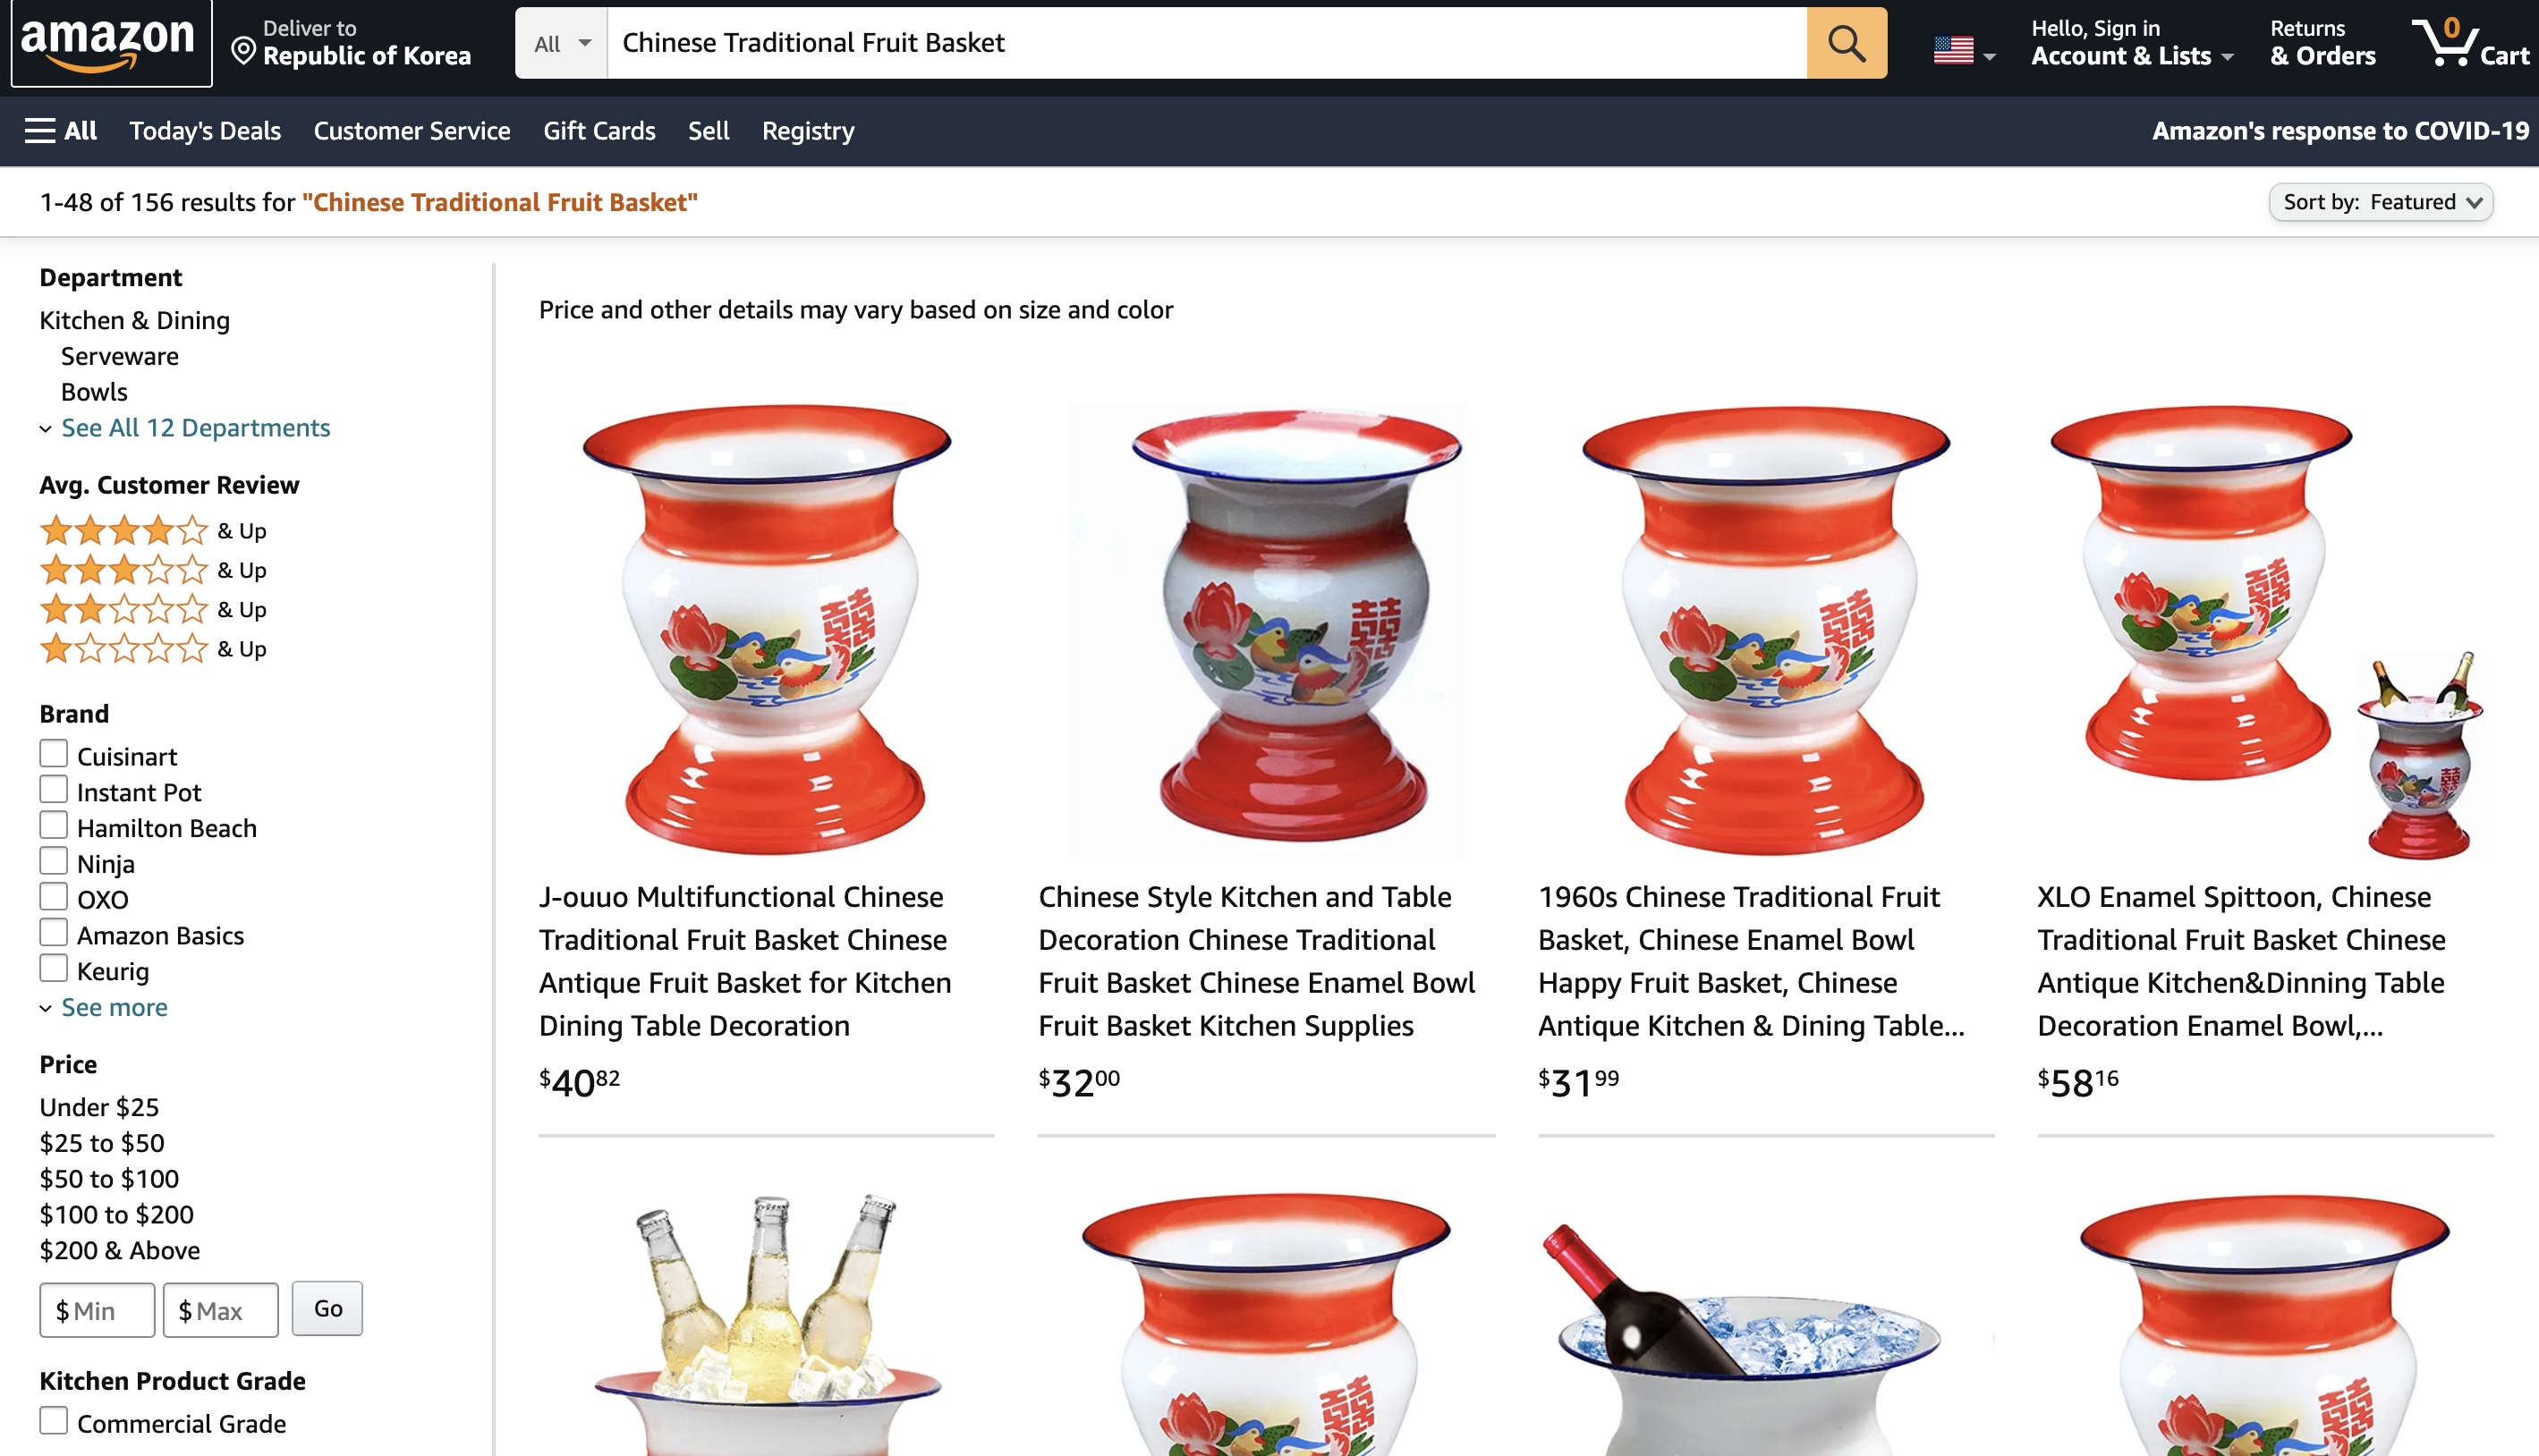 Chamber pot is being sold on Amazon as a Chinese Traditional Fruit Basket